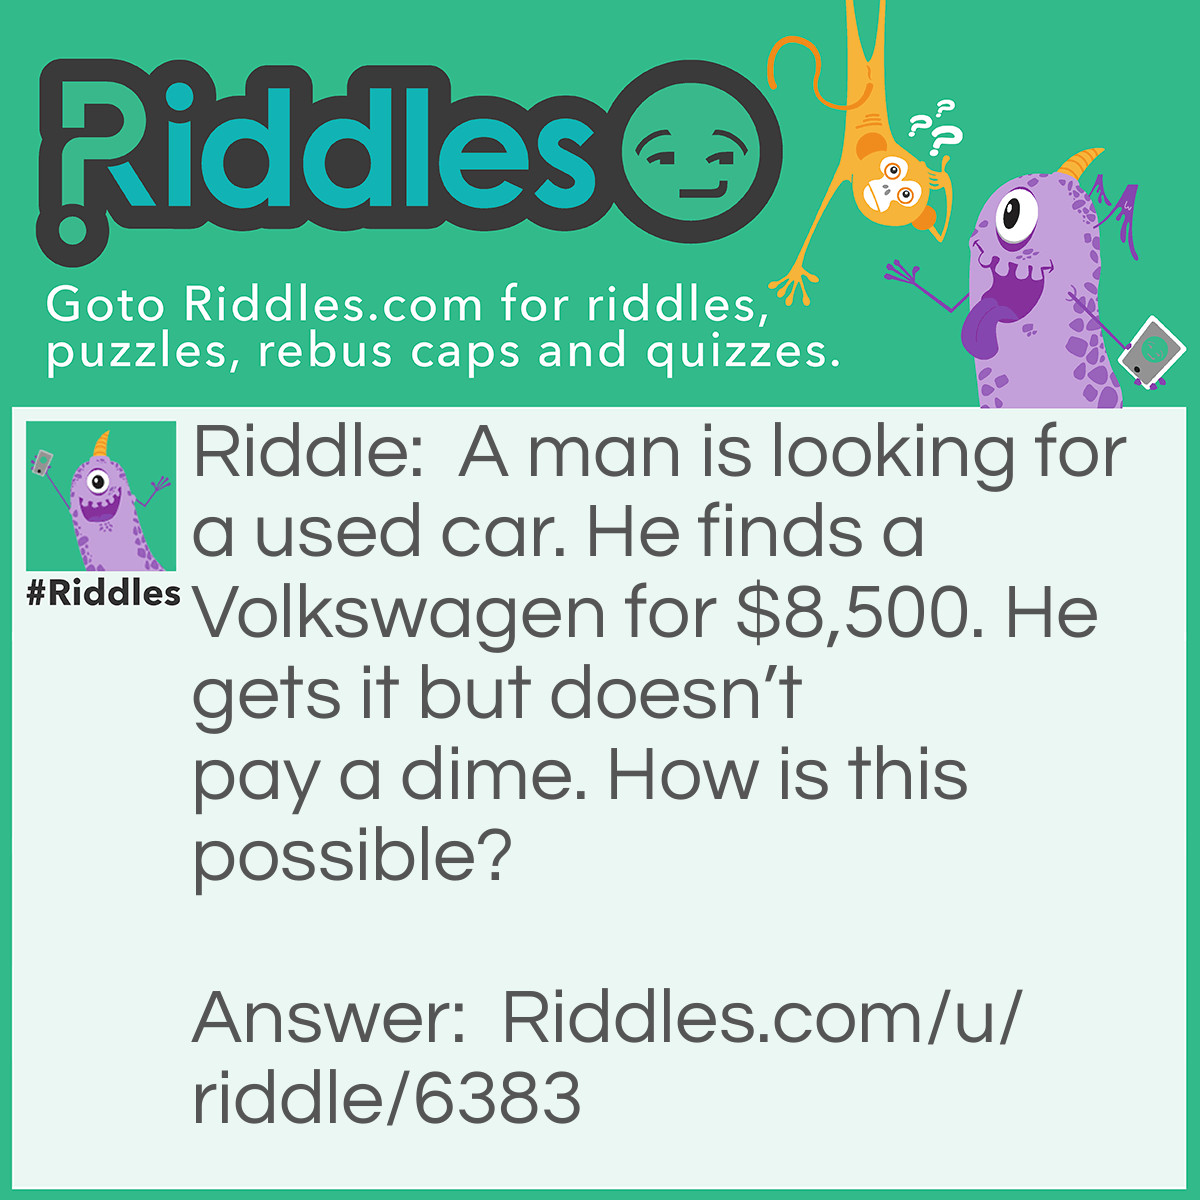 Riddle: A man is looking for a used car. He finds a Volkswagen for $8,500. He gets it but doesn't pay a dime. How is this possible? Answer: If your getting something over a $ you wouldn’t use dimes to pay for it.